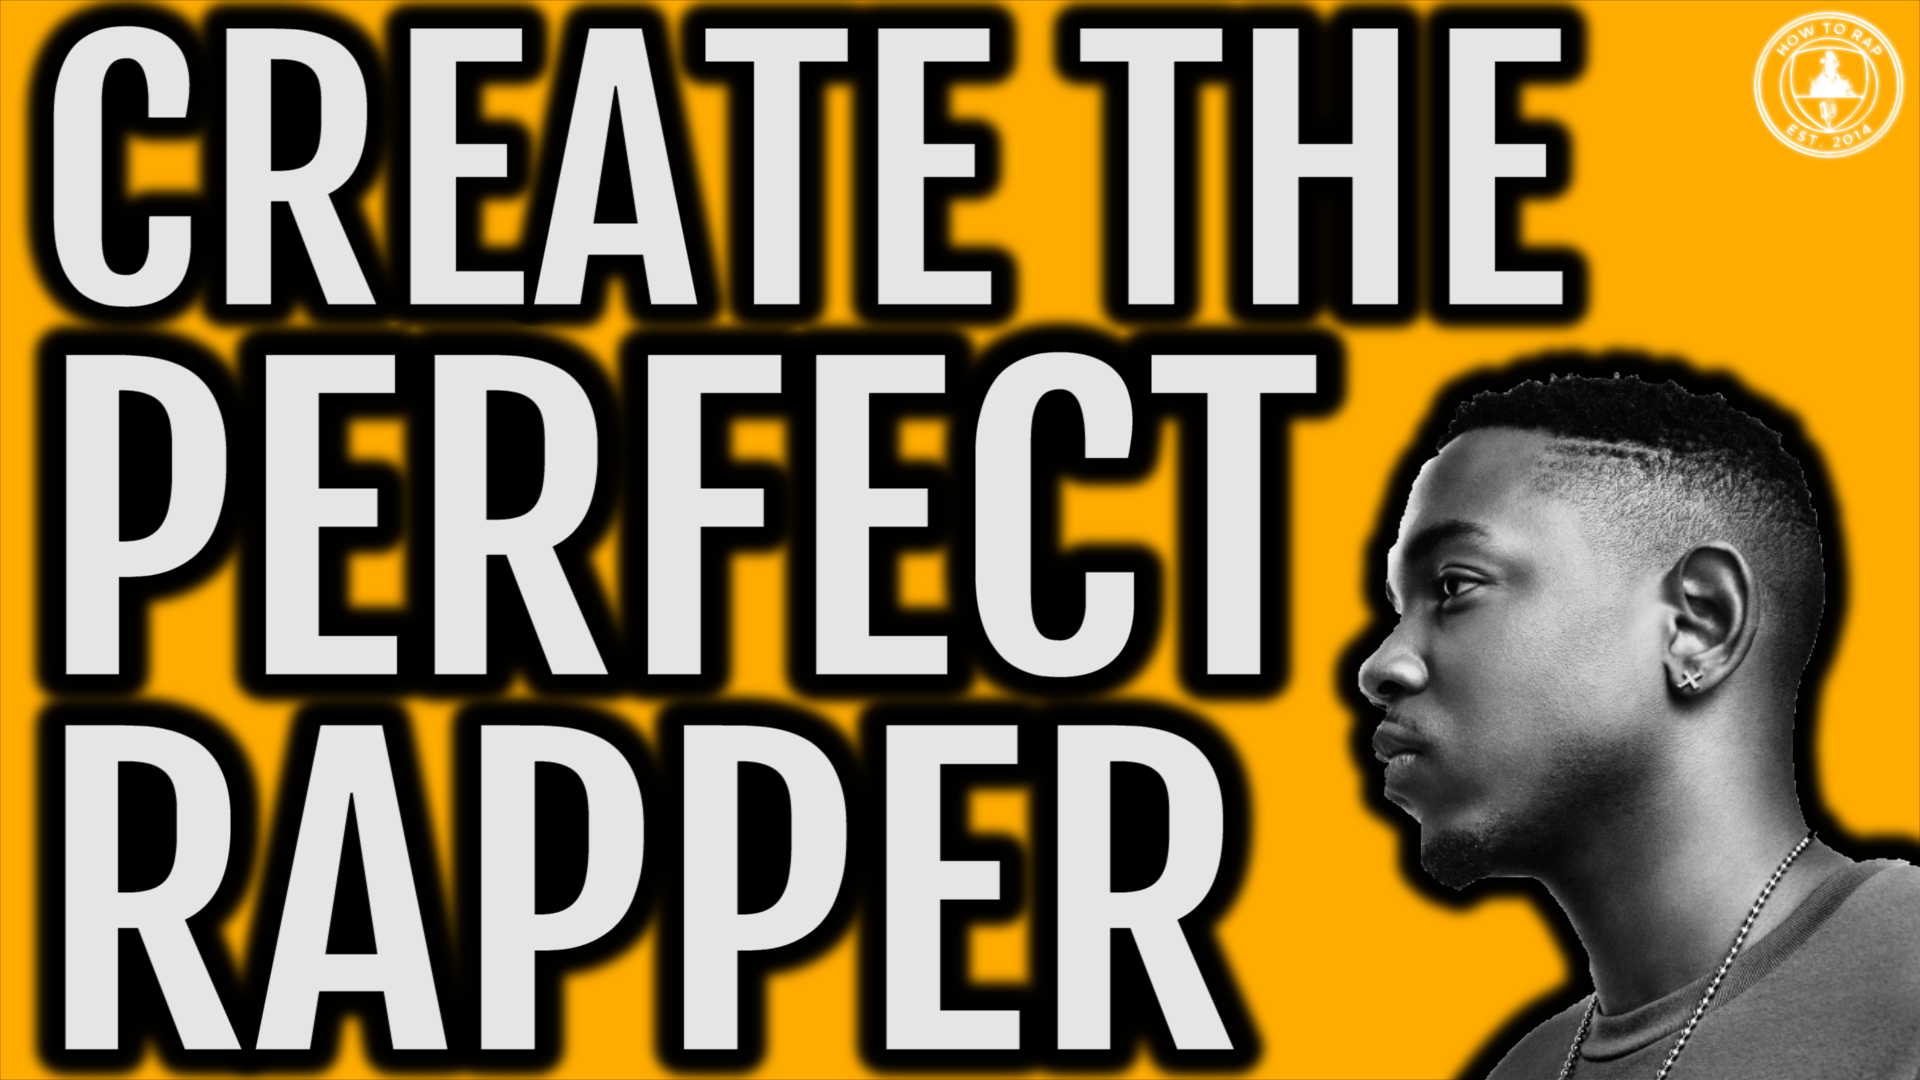 How To Rap For Beginners: The Perfect Rapper